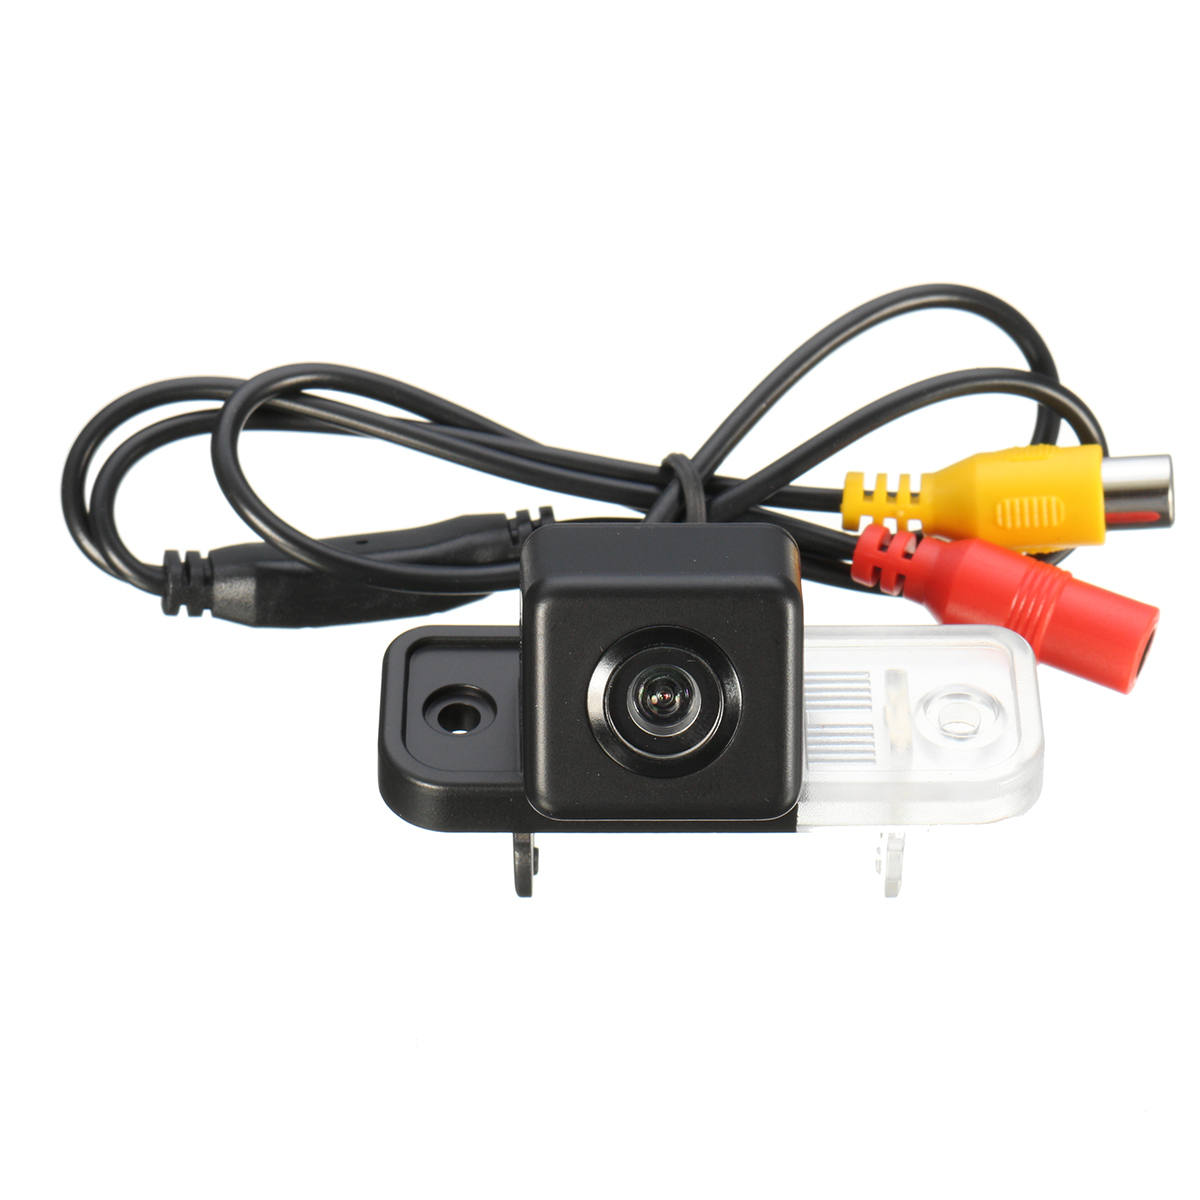 Car CCD Rear View Camera For Mercedes Benz C - Class W203 W211 CLS W219 2